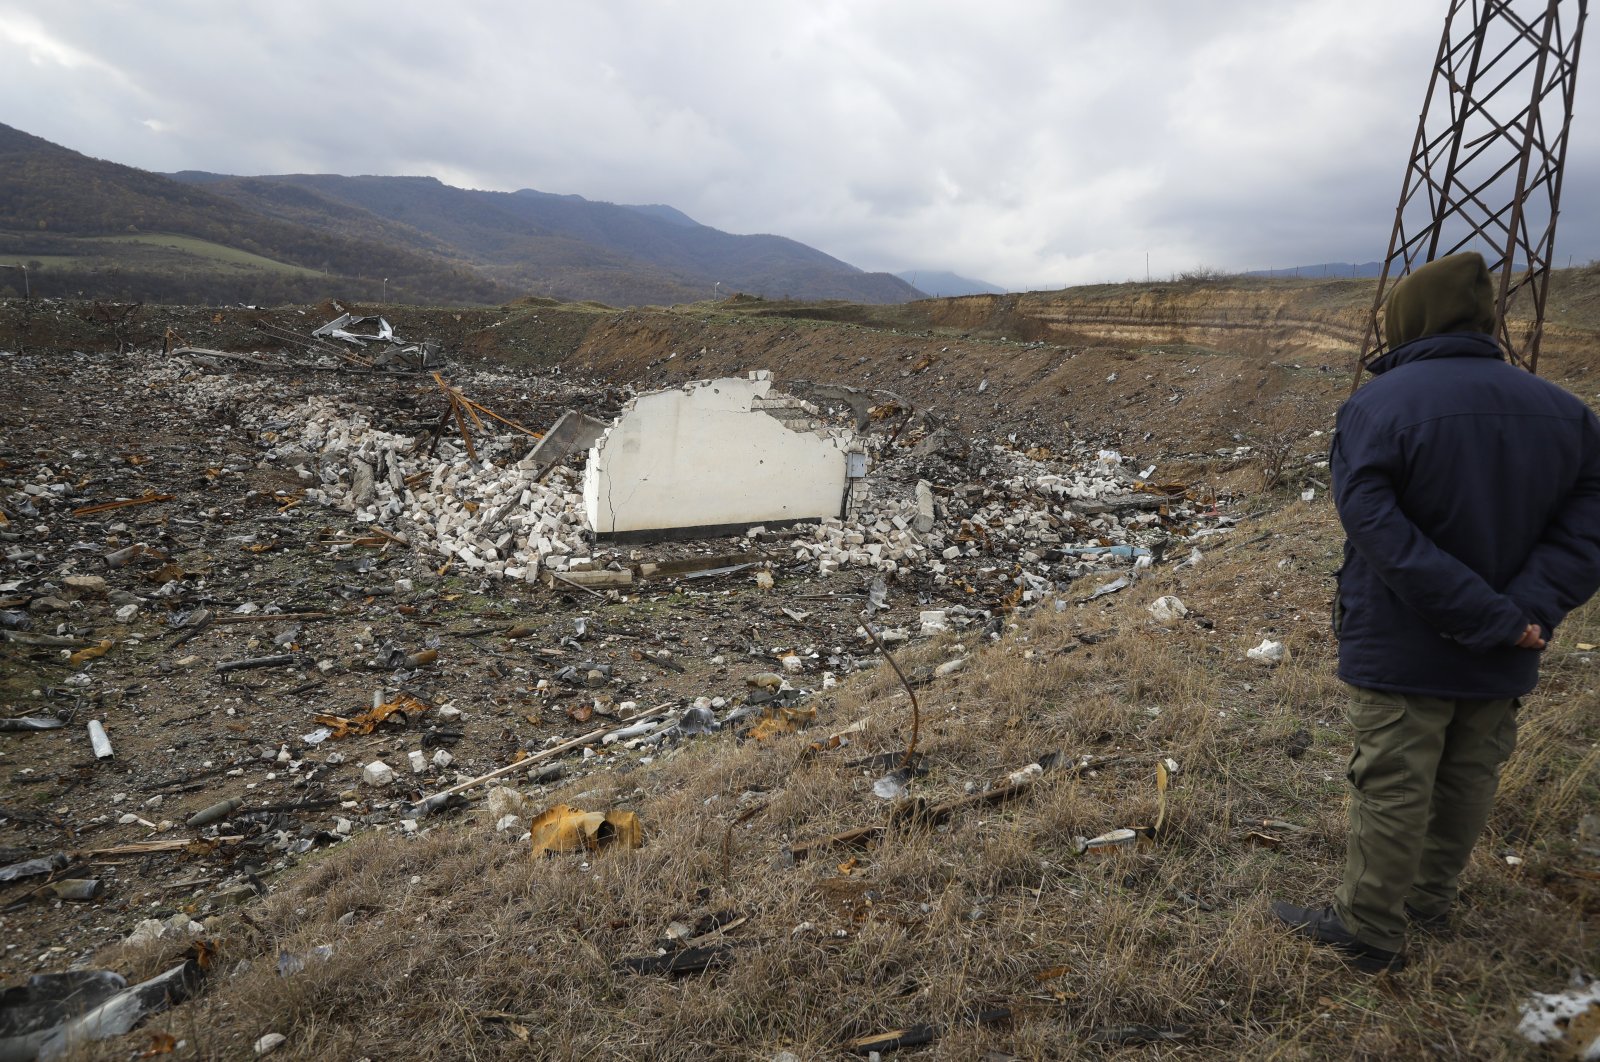 A member of a survey team from the Halo Trust mine-clearing organization looks on at a damaged ammunition store near the outskirts of the capital Stepanakert (Khankendi) of Nagorno-Karabakh, Azerbaijan, Nov. 23, 2020. (AP File Photo)